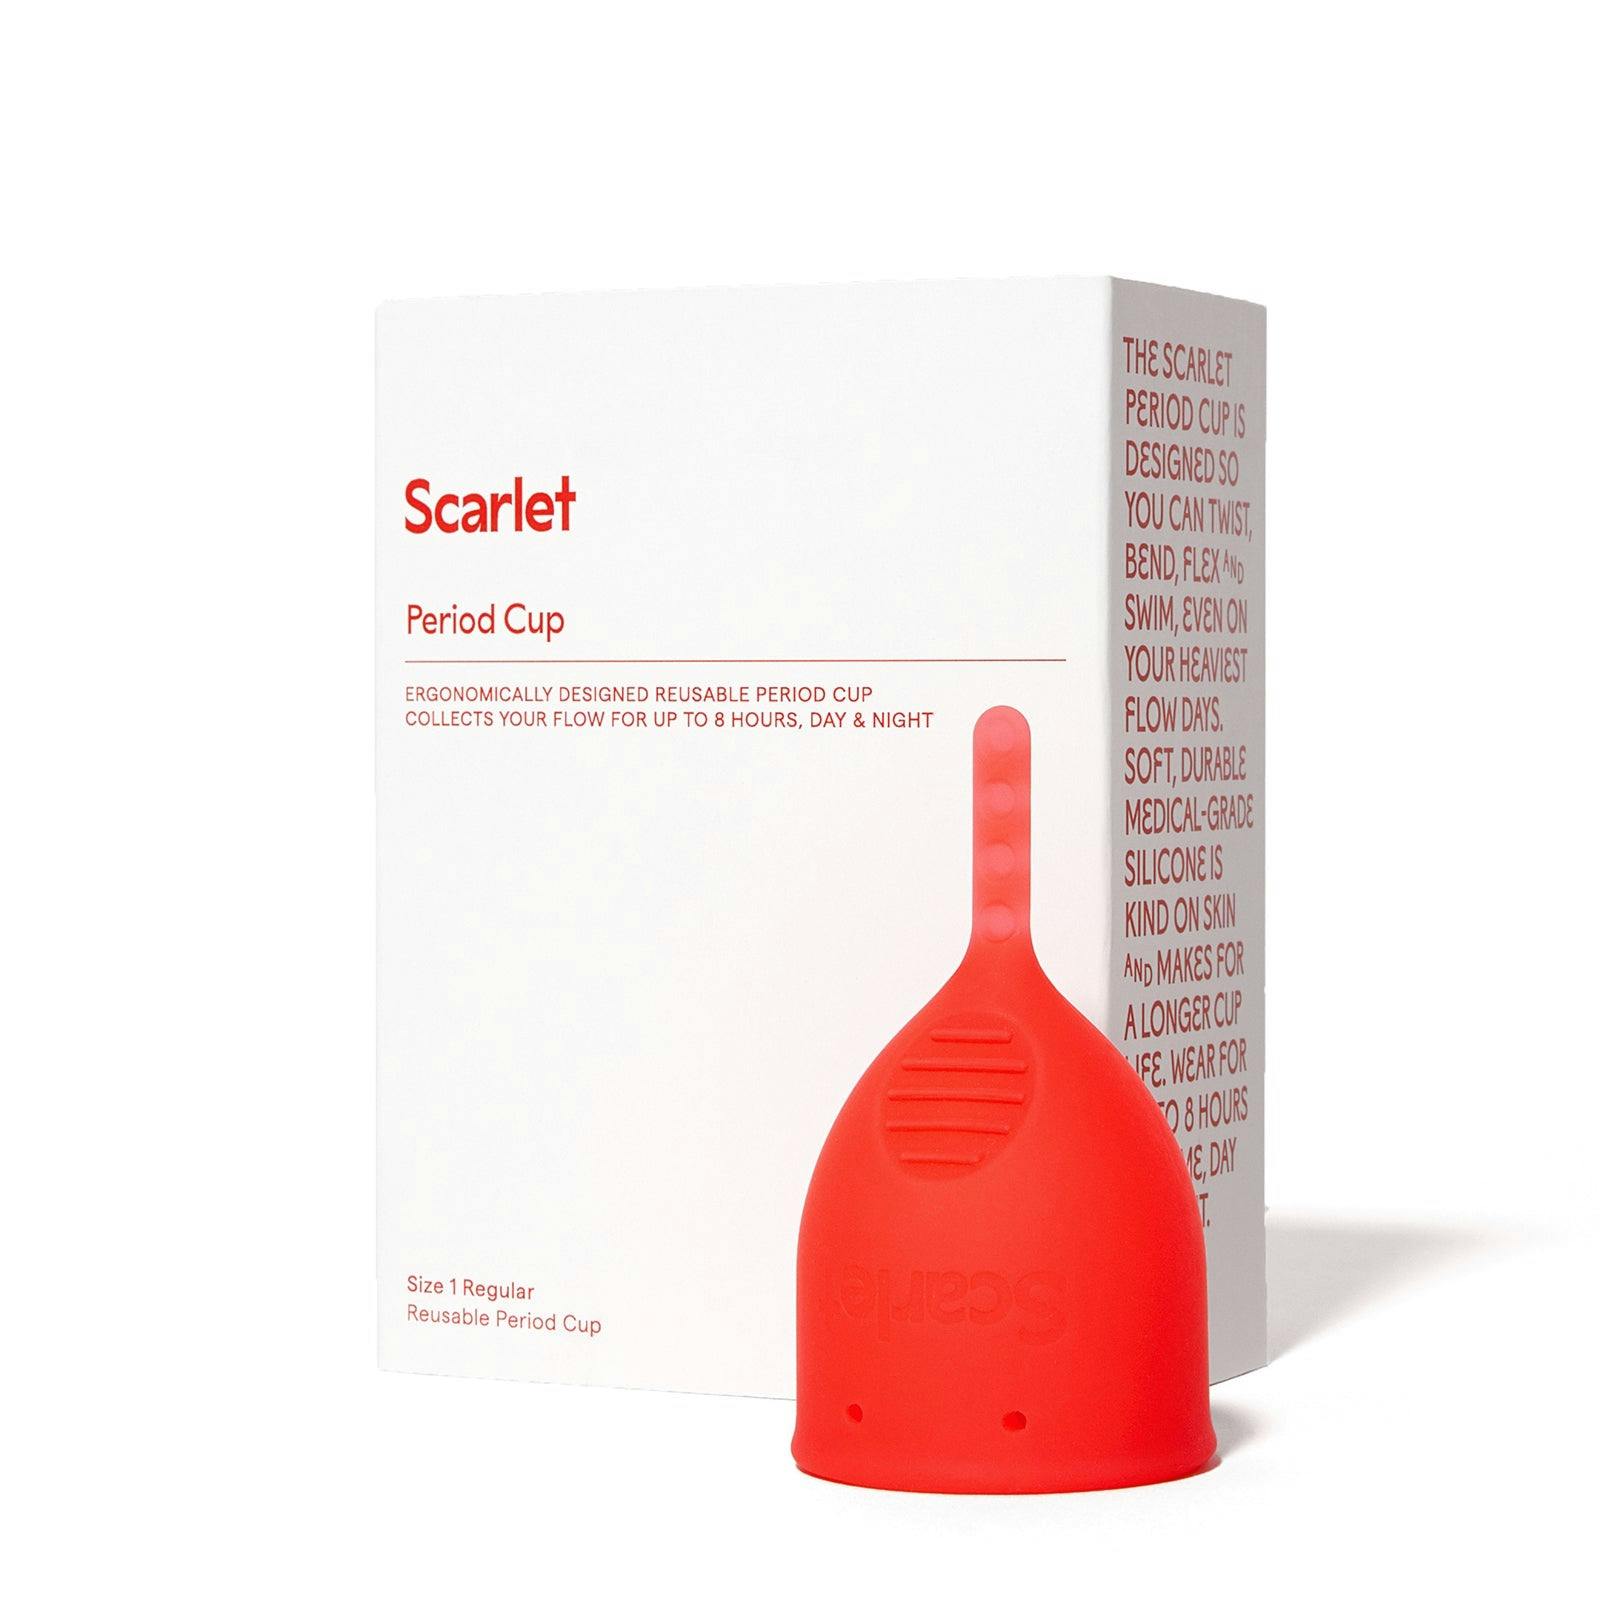 Scarlet Period Cup